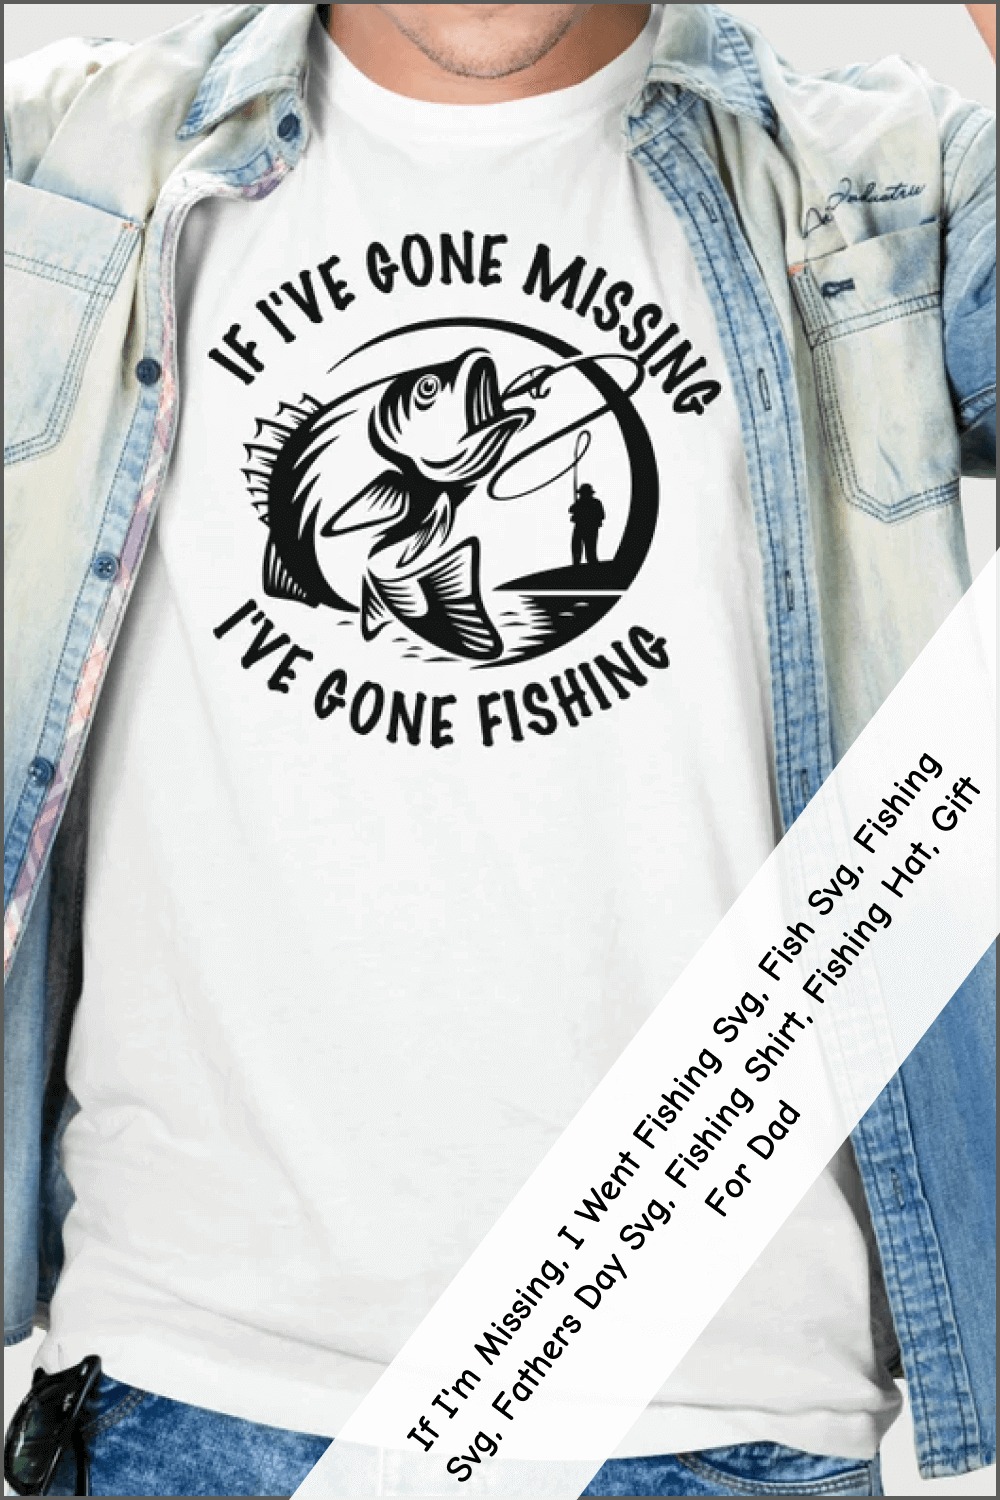 Fathers Day SVG, Fishing Shirt, Fathers Day Gift, Dad Shirt, Funny Fathers  Day Shirt, Fishing Shirt, Fisherman Shirt, Fathers Day Tshirt t shirt  design for - Buy t-shirt designs